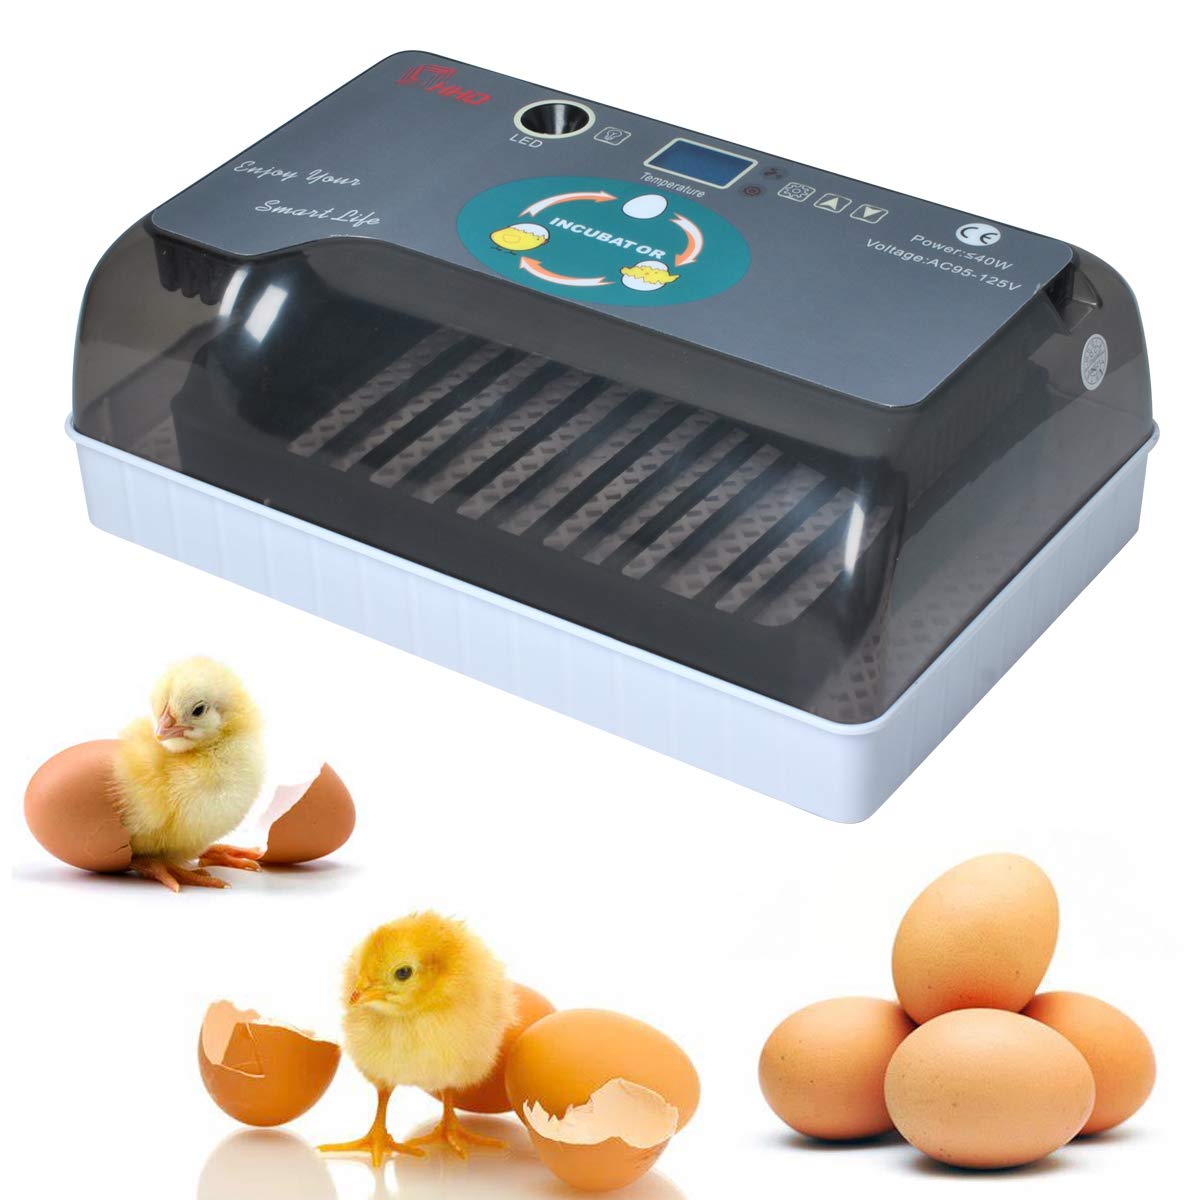 Smart Egg Incubator Clear View, Automatic Egg Turner, Temperature Humidity Control, Egg Candler, Poultry Egg Incubator for Hatching 12-15 Chicken Eggs, 35 Quail Eggs, 9 Duck Eggs, Turkey Goose Birds